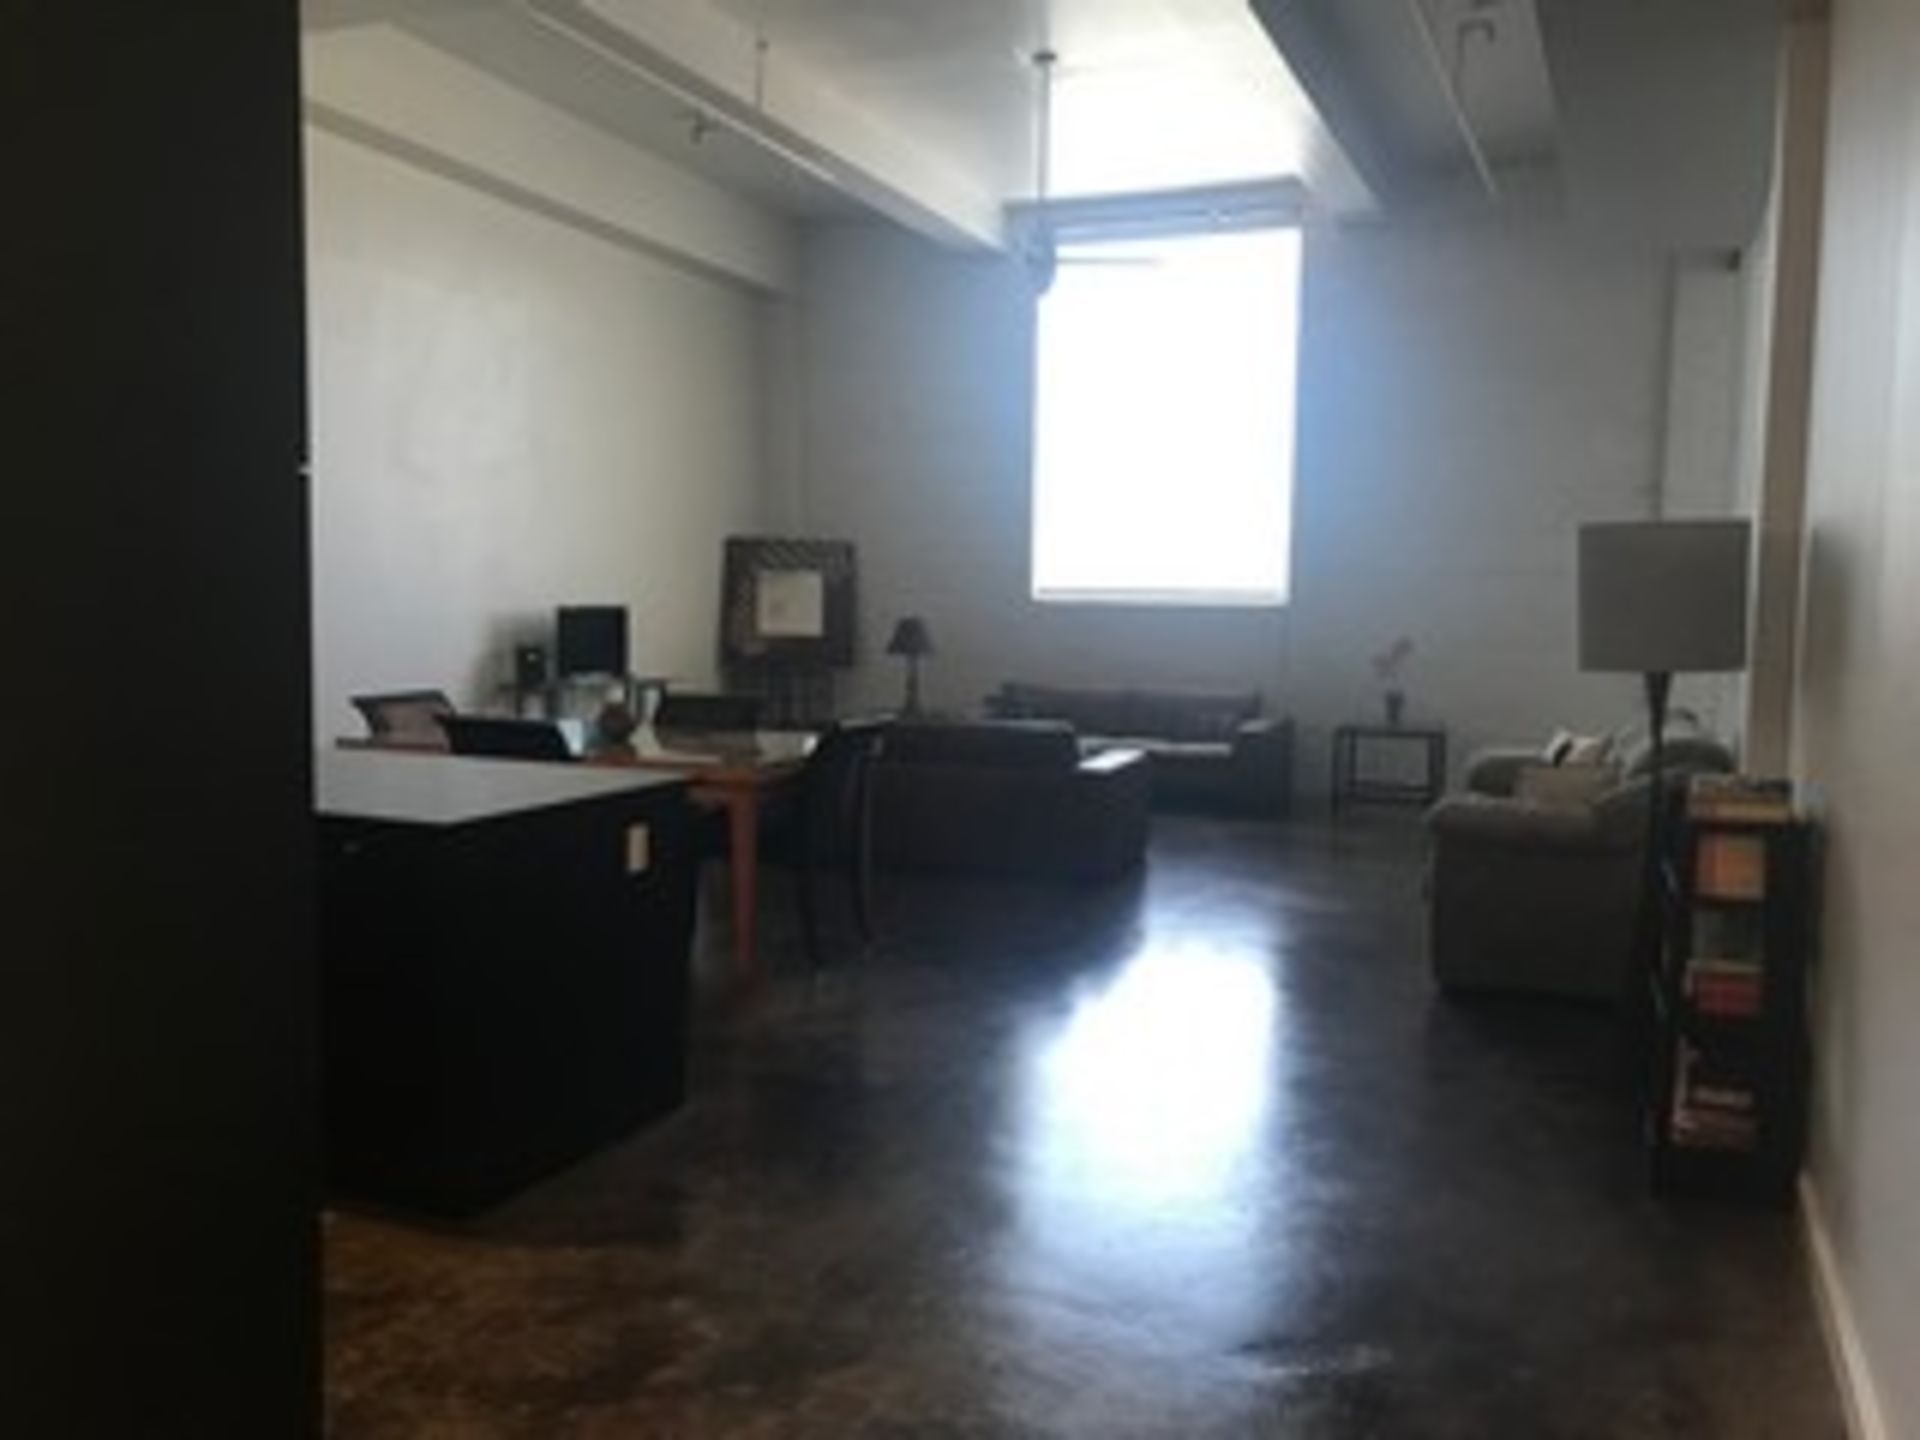 LOT CONTENTS OF CONDO - NO APPLIANCES (LOCATED IN NEW ORLEANS, LA) - Image 2 of 9